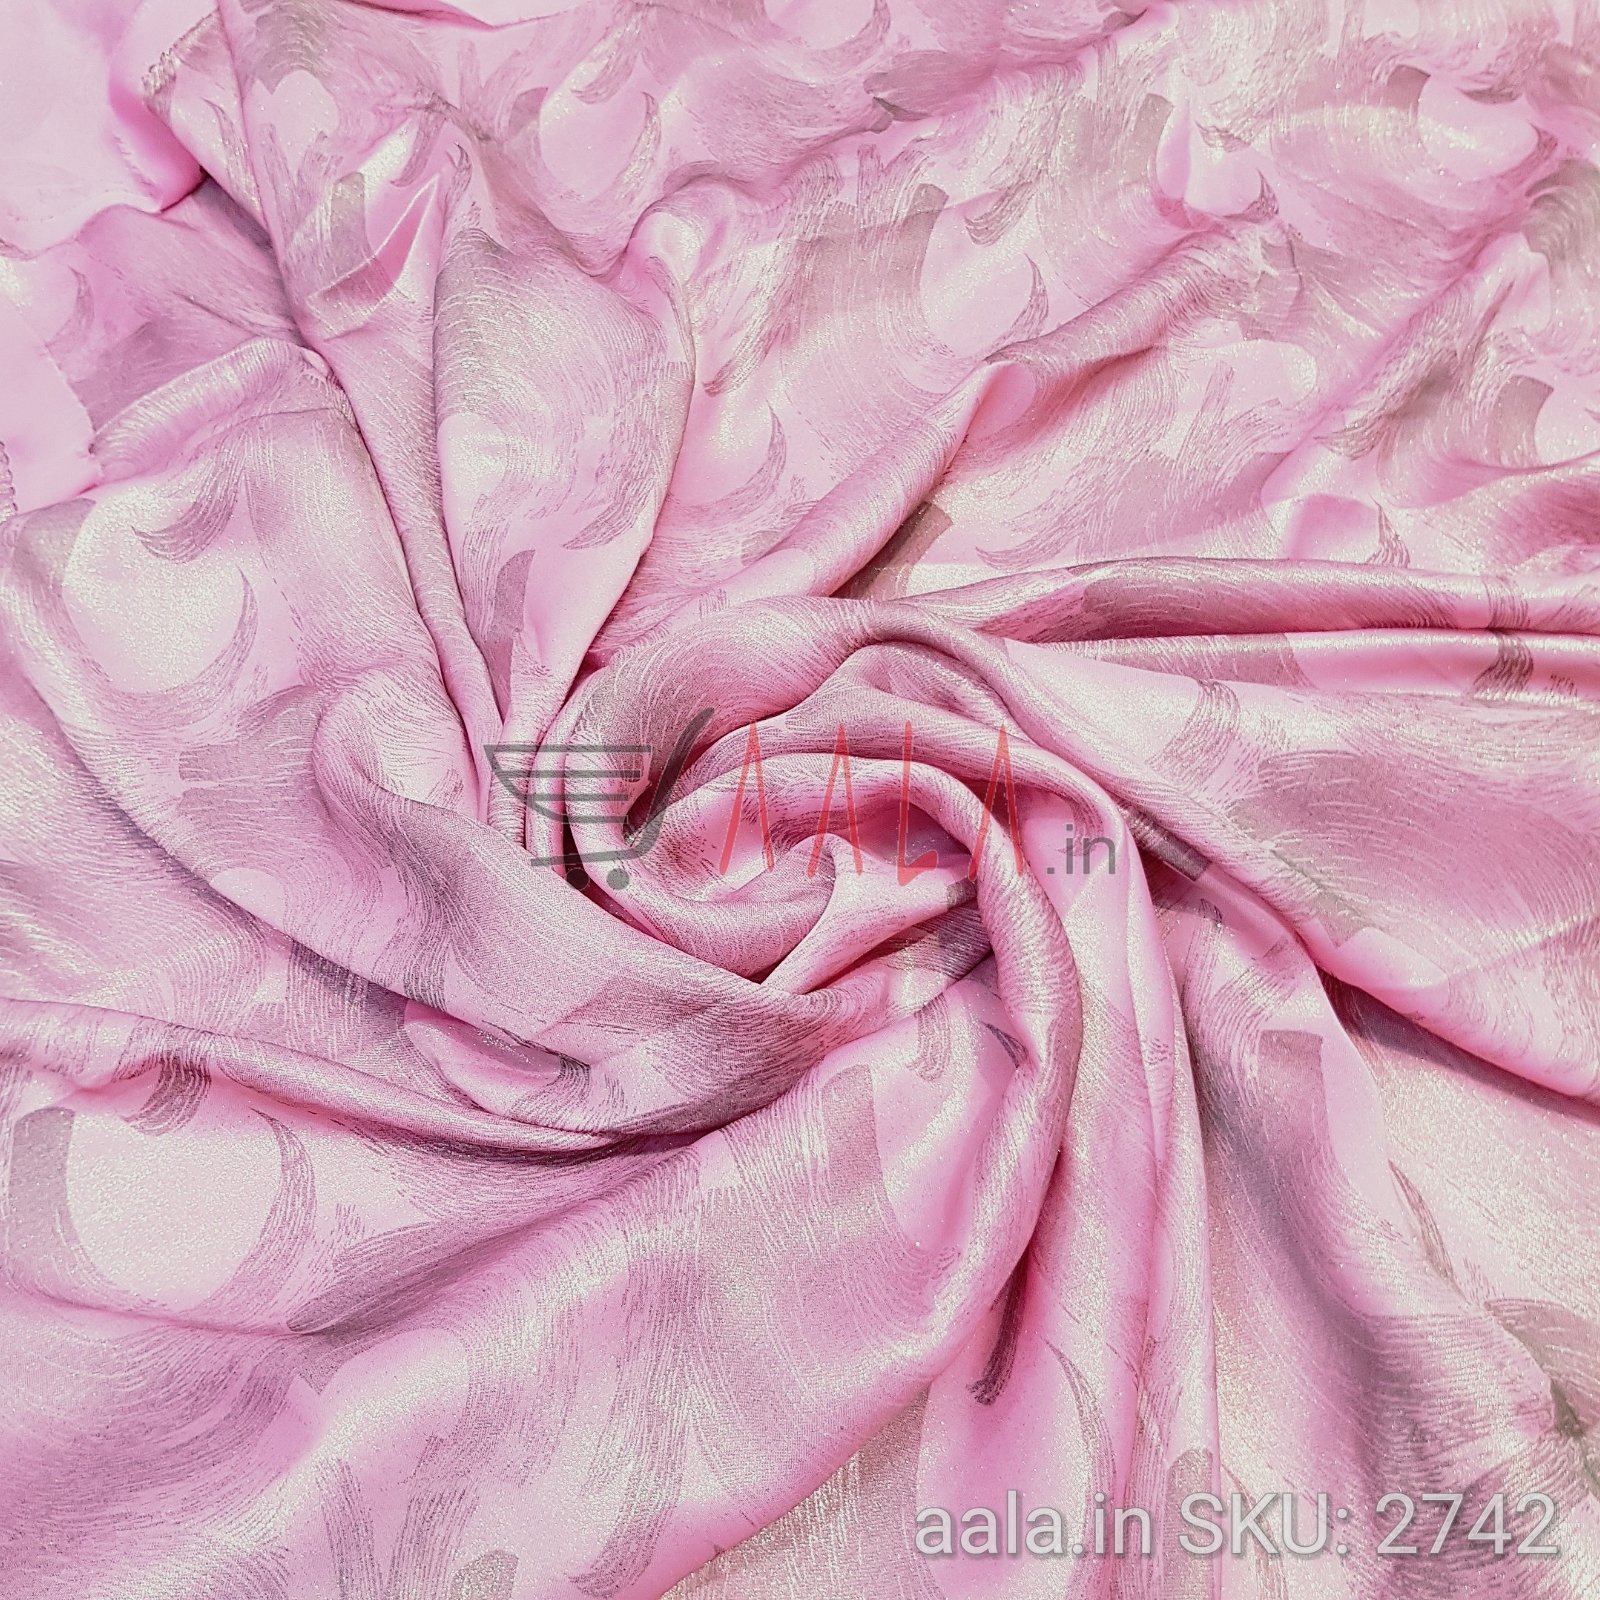 Foil Print Satin Georgette Poly-ester 44 Inches Dyed Per Metre #2742